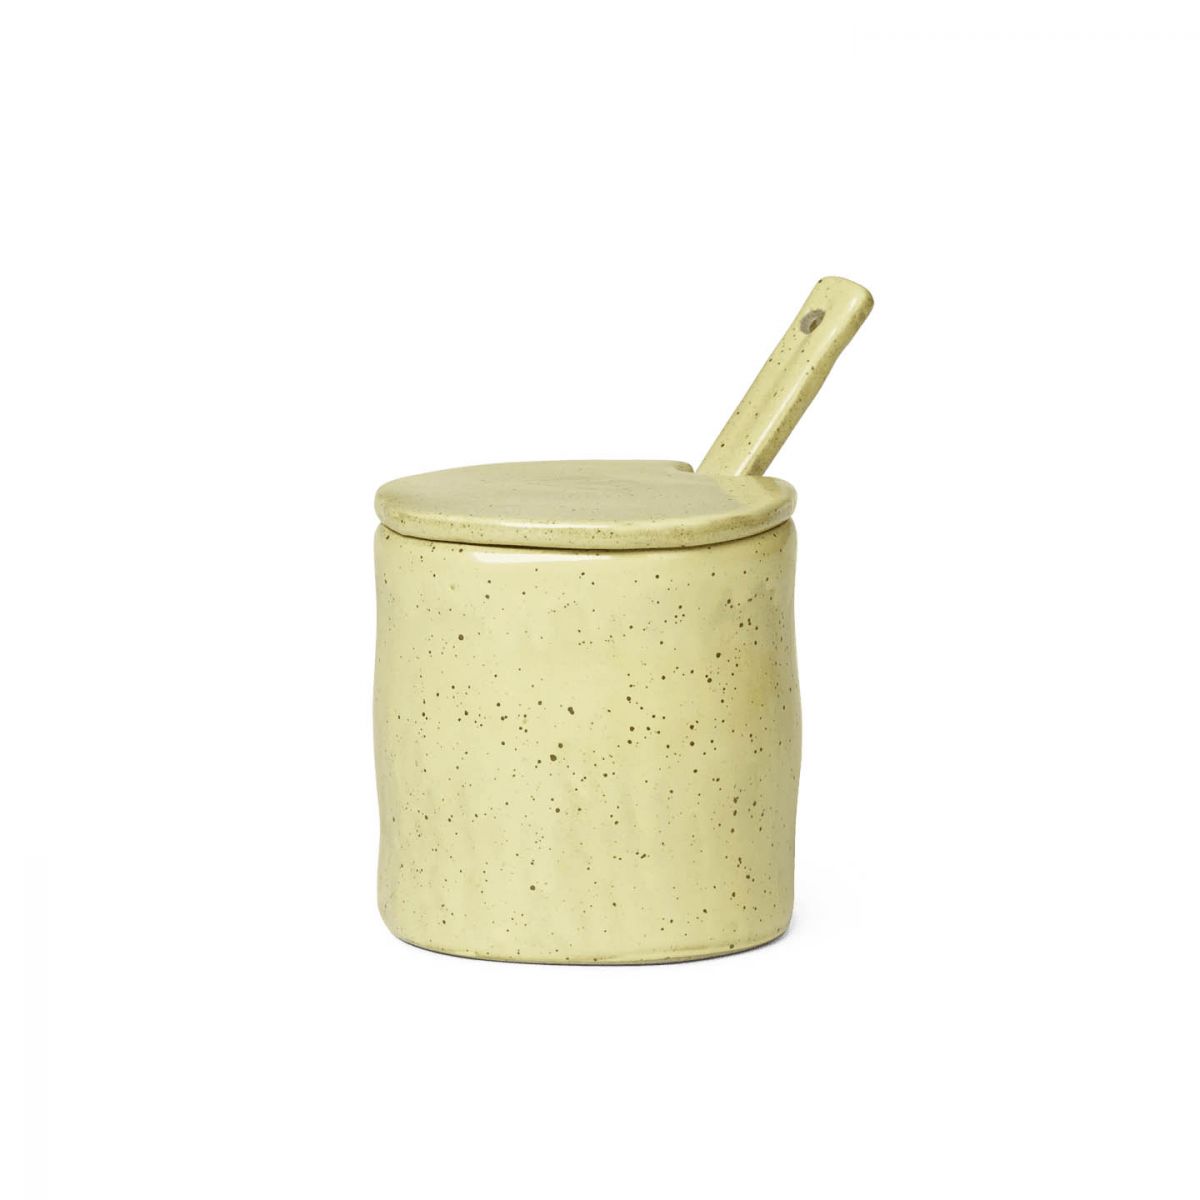 Flow Jar with spoon - Yellow Speckle